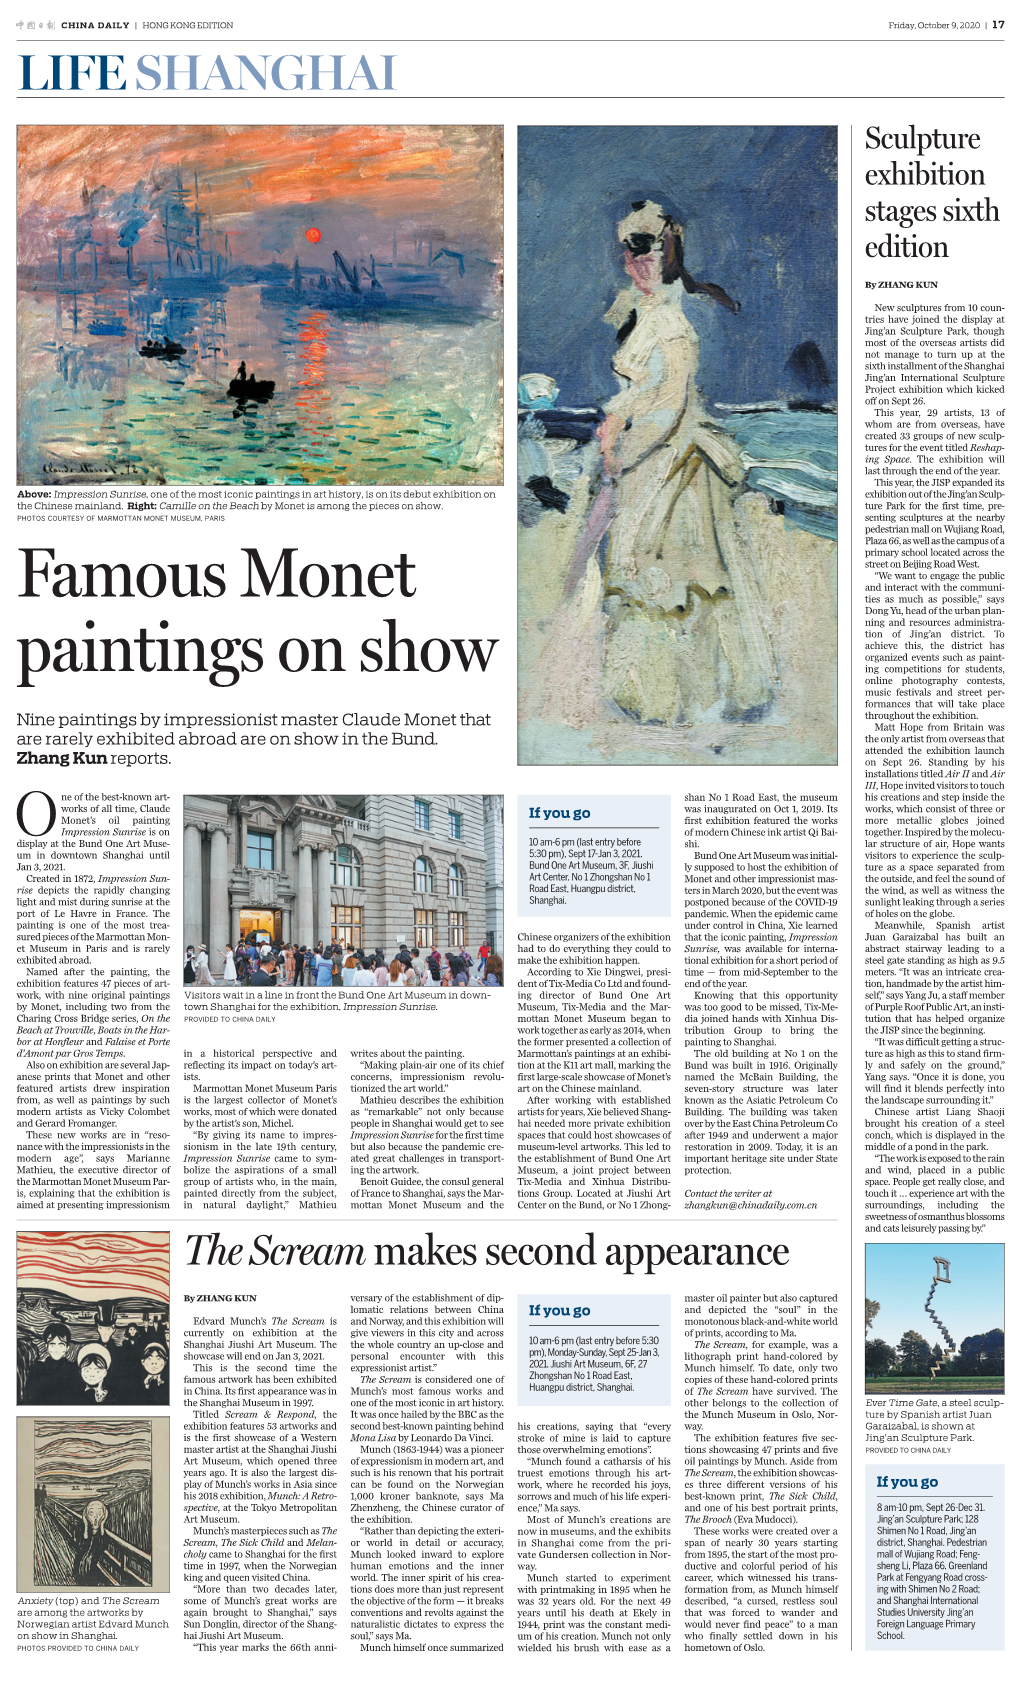 Famous Monet Paintings on Show